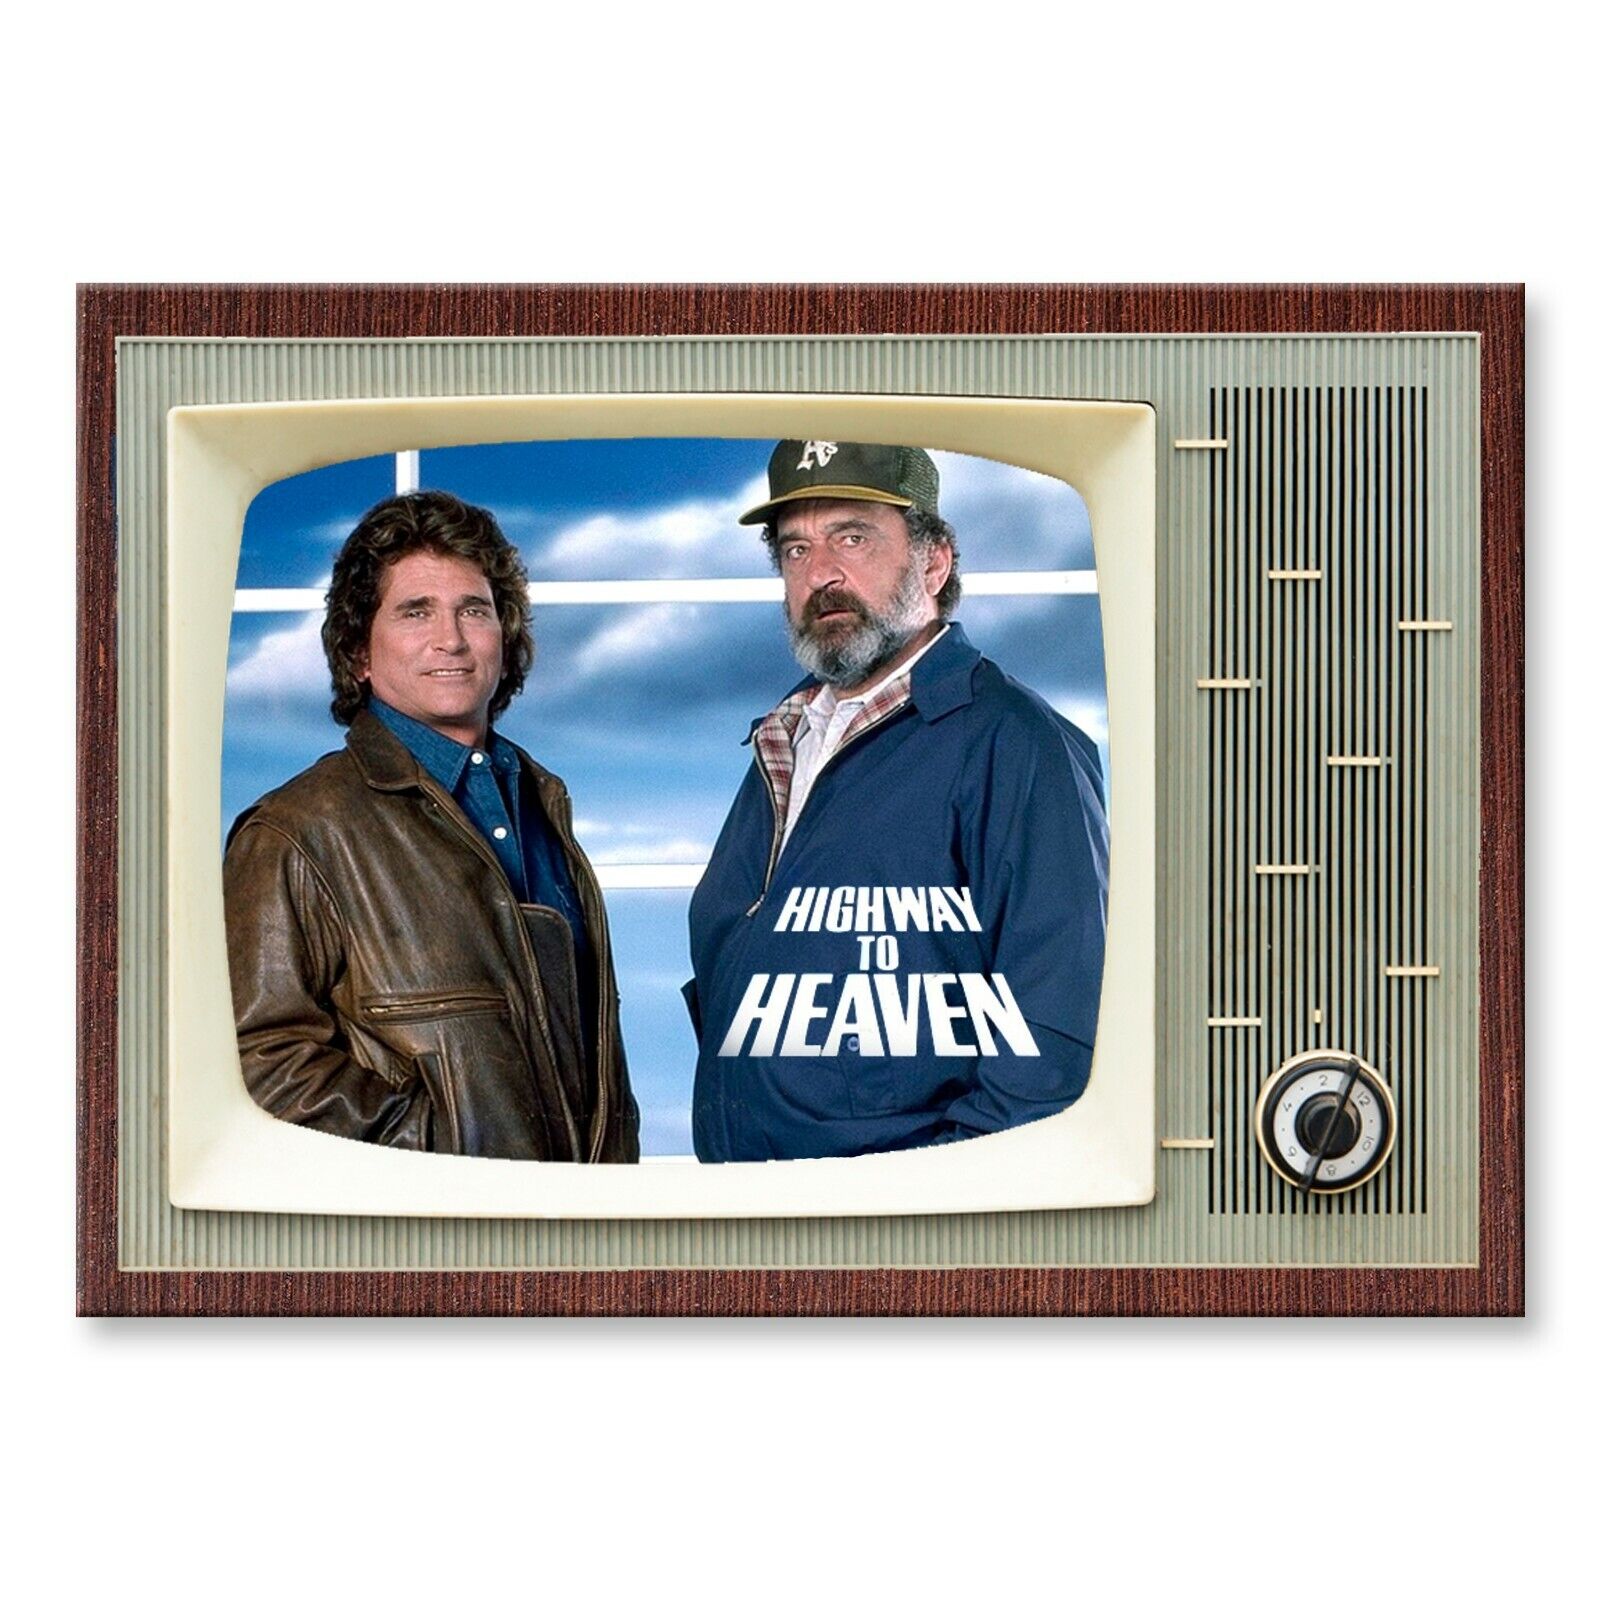 HIGHWAY TO HEAVEN TV Show TV 3.5 inches x 2.5 inches Steel FRIDGE MAGNET